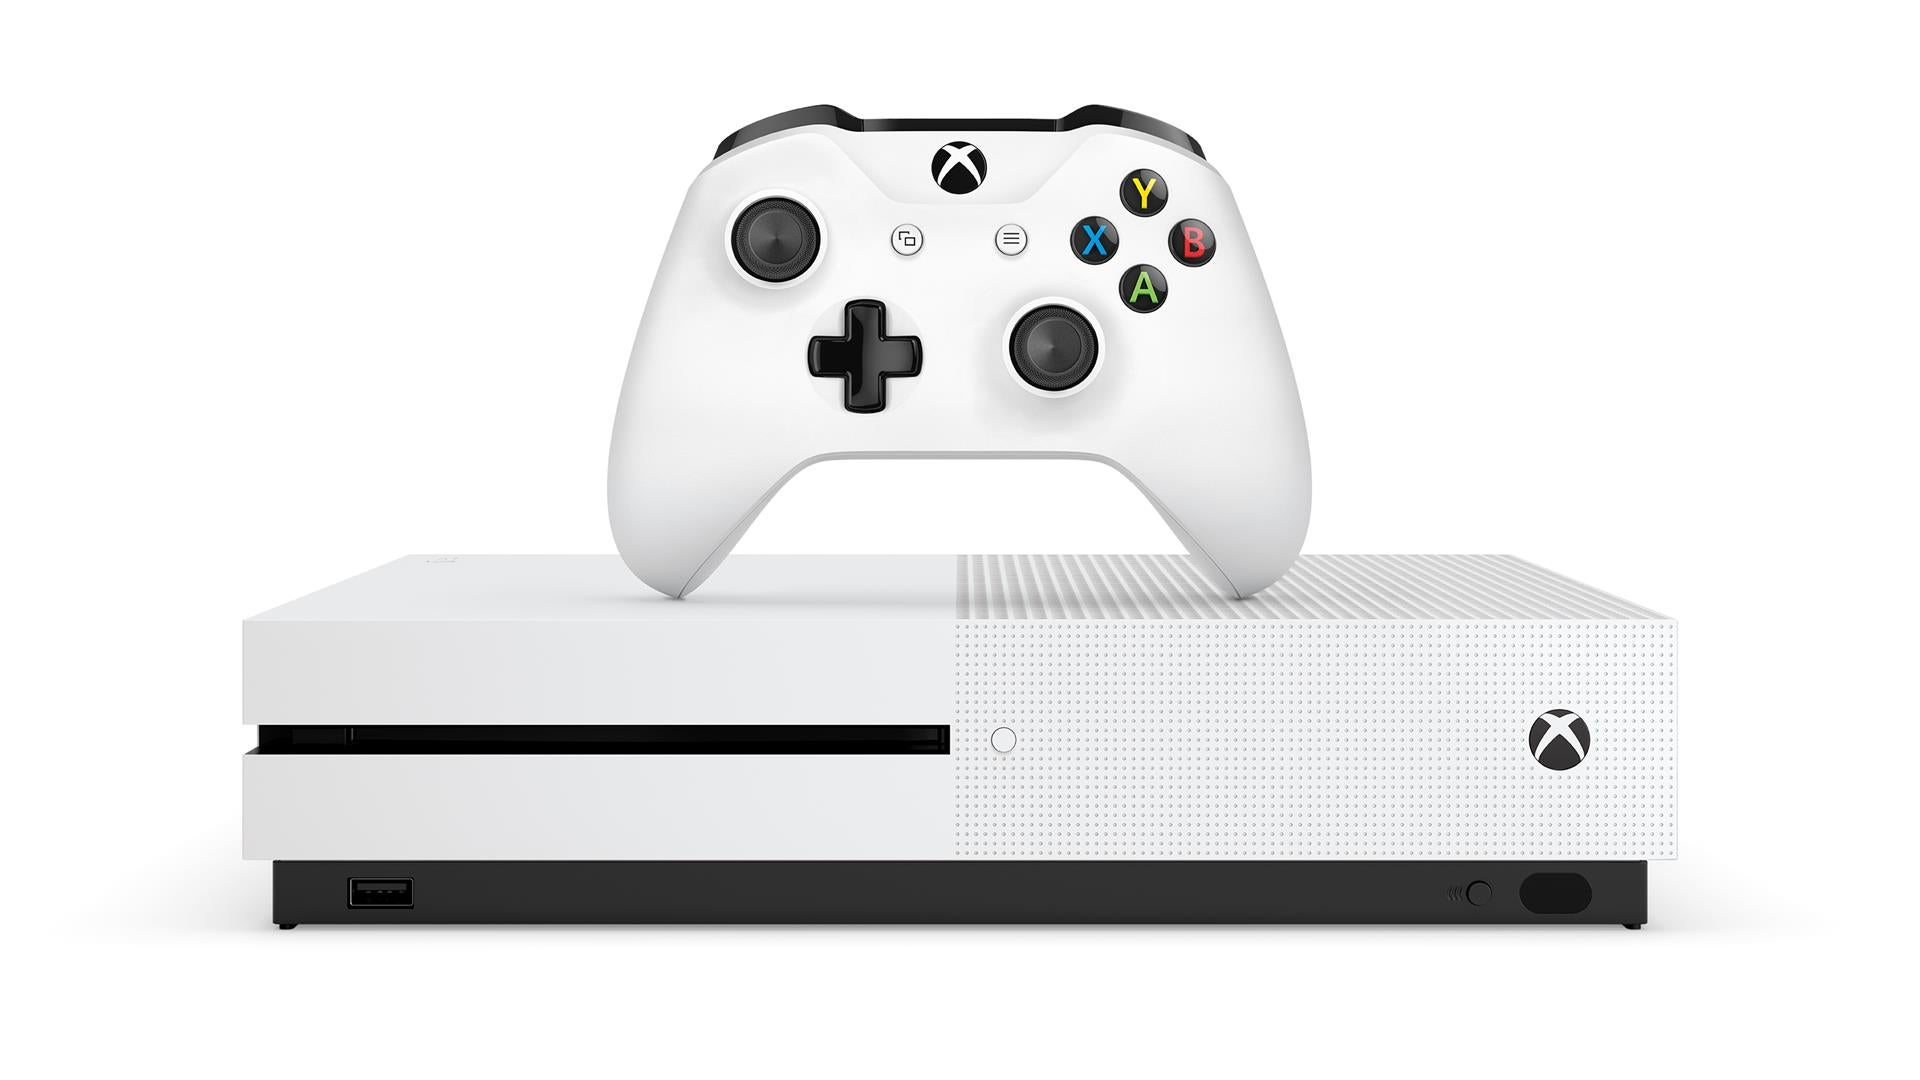 Image for Xbox One S: here's a unboxing video and side-by-side size comparison